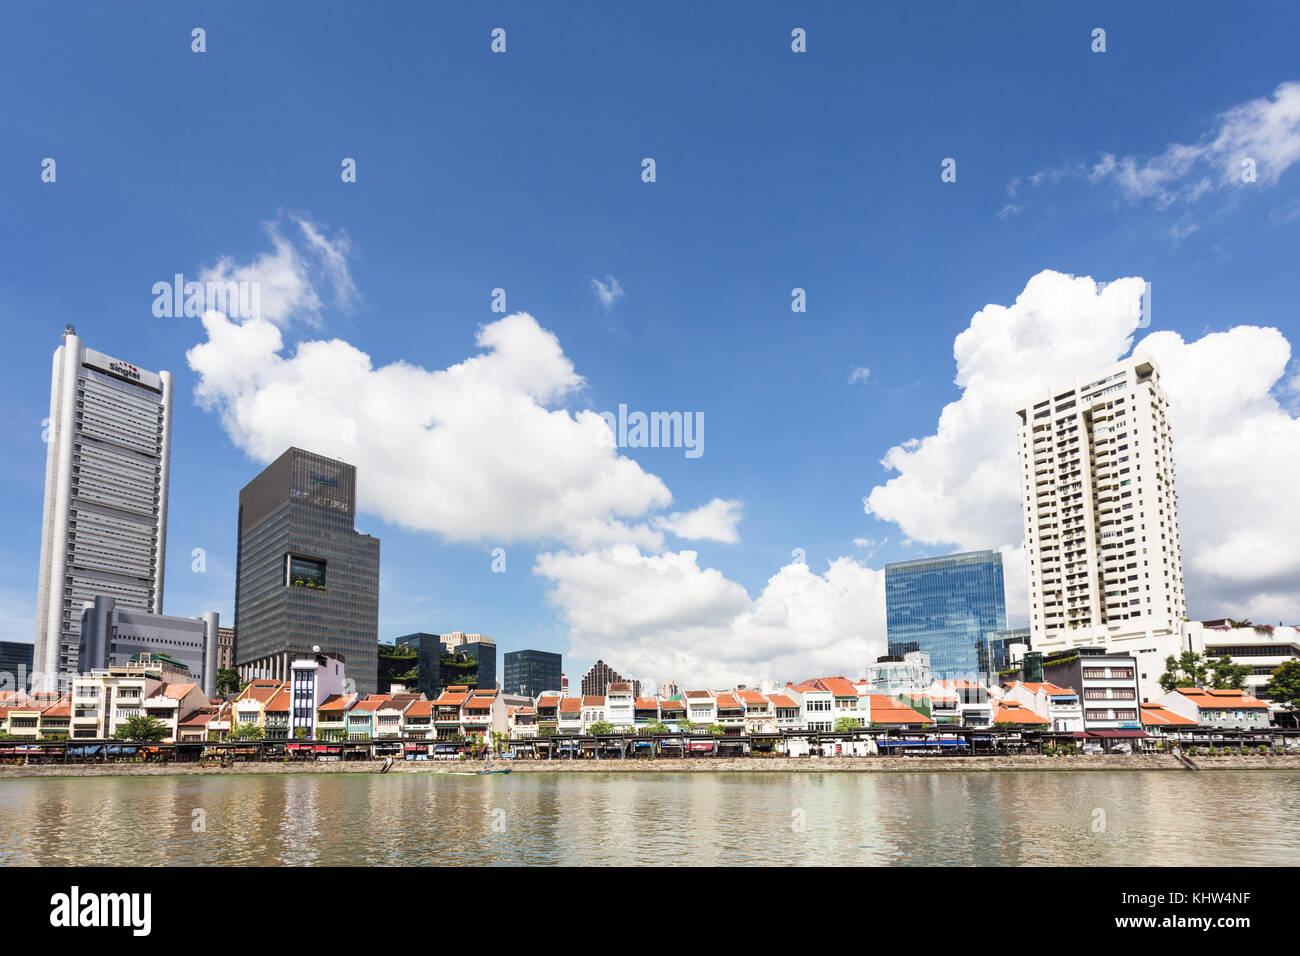 Singapore - October 6, 2017: The low rise buildings hosting bars and restaurants line the Clark Quay along the Singapore river on a sunny summer day i Stock Photo